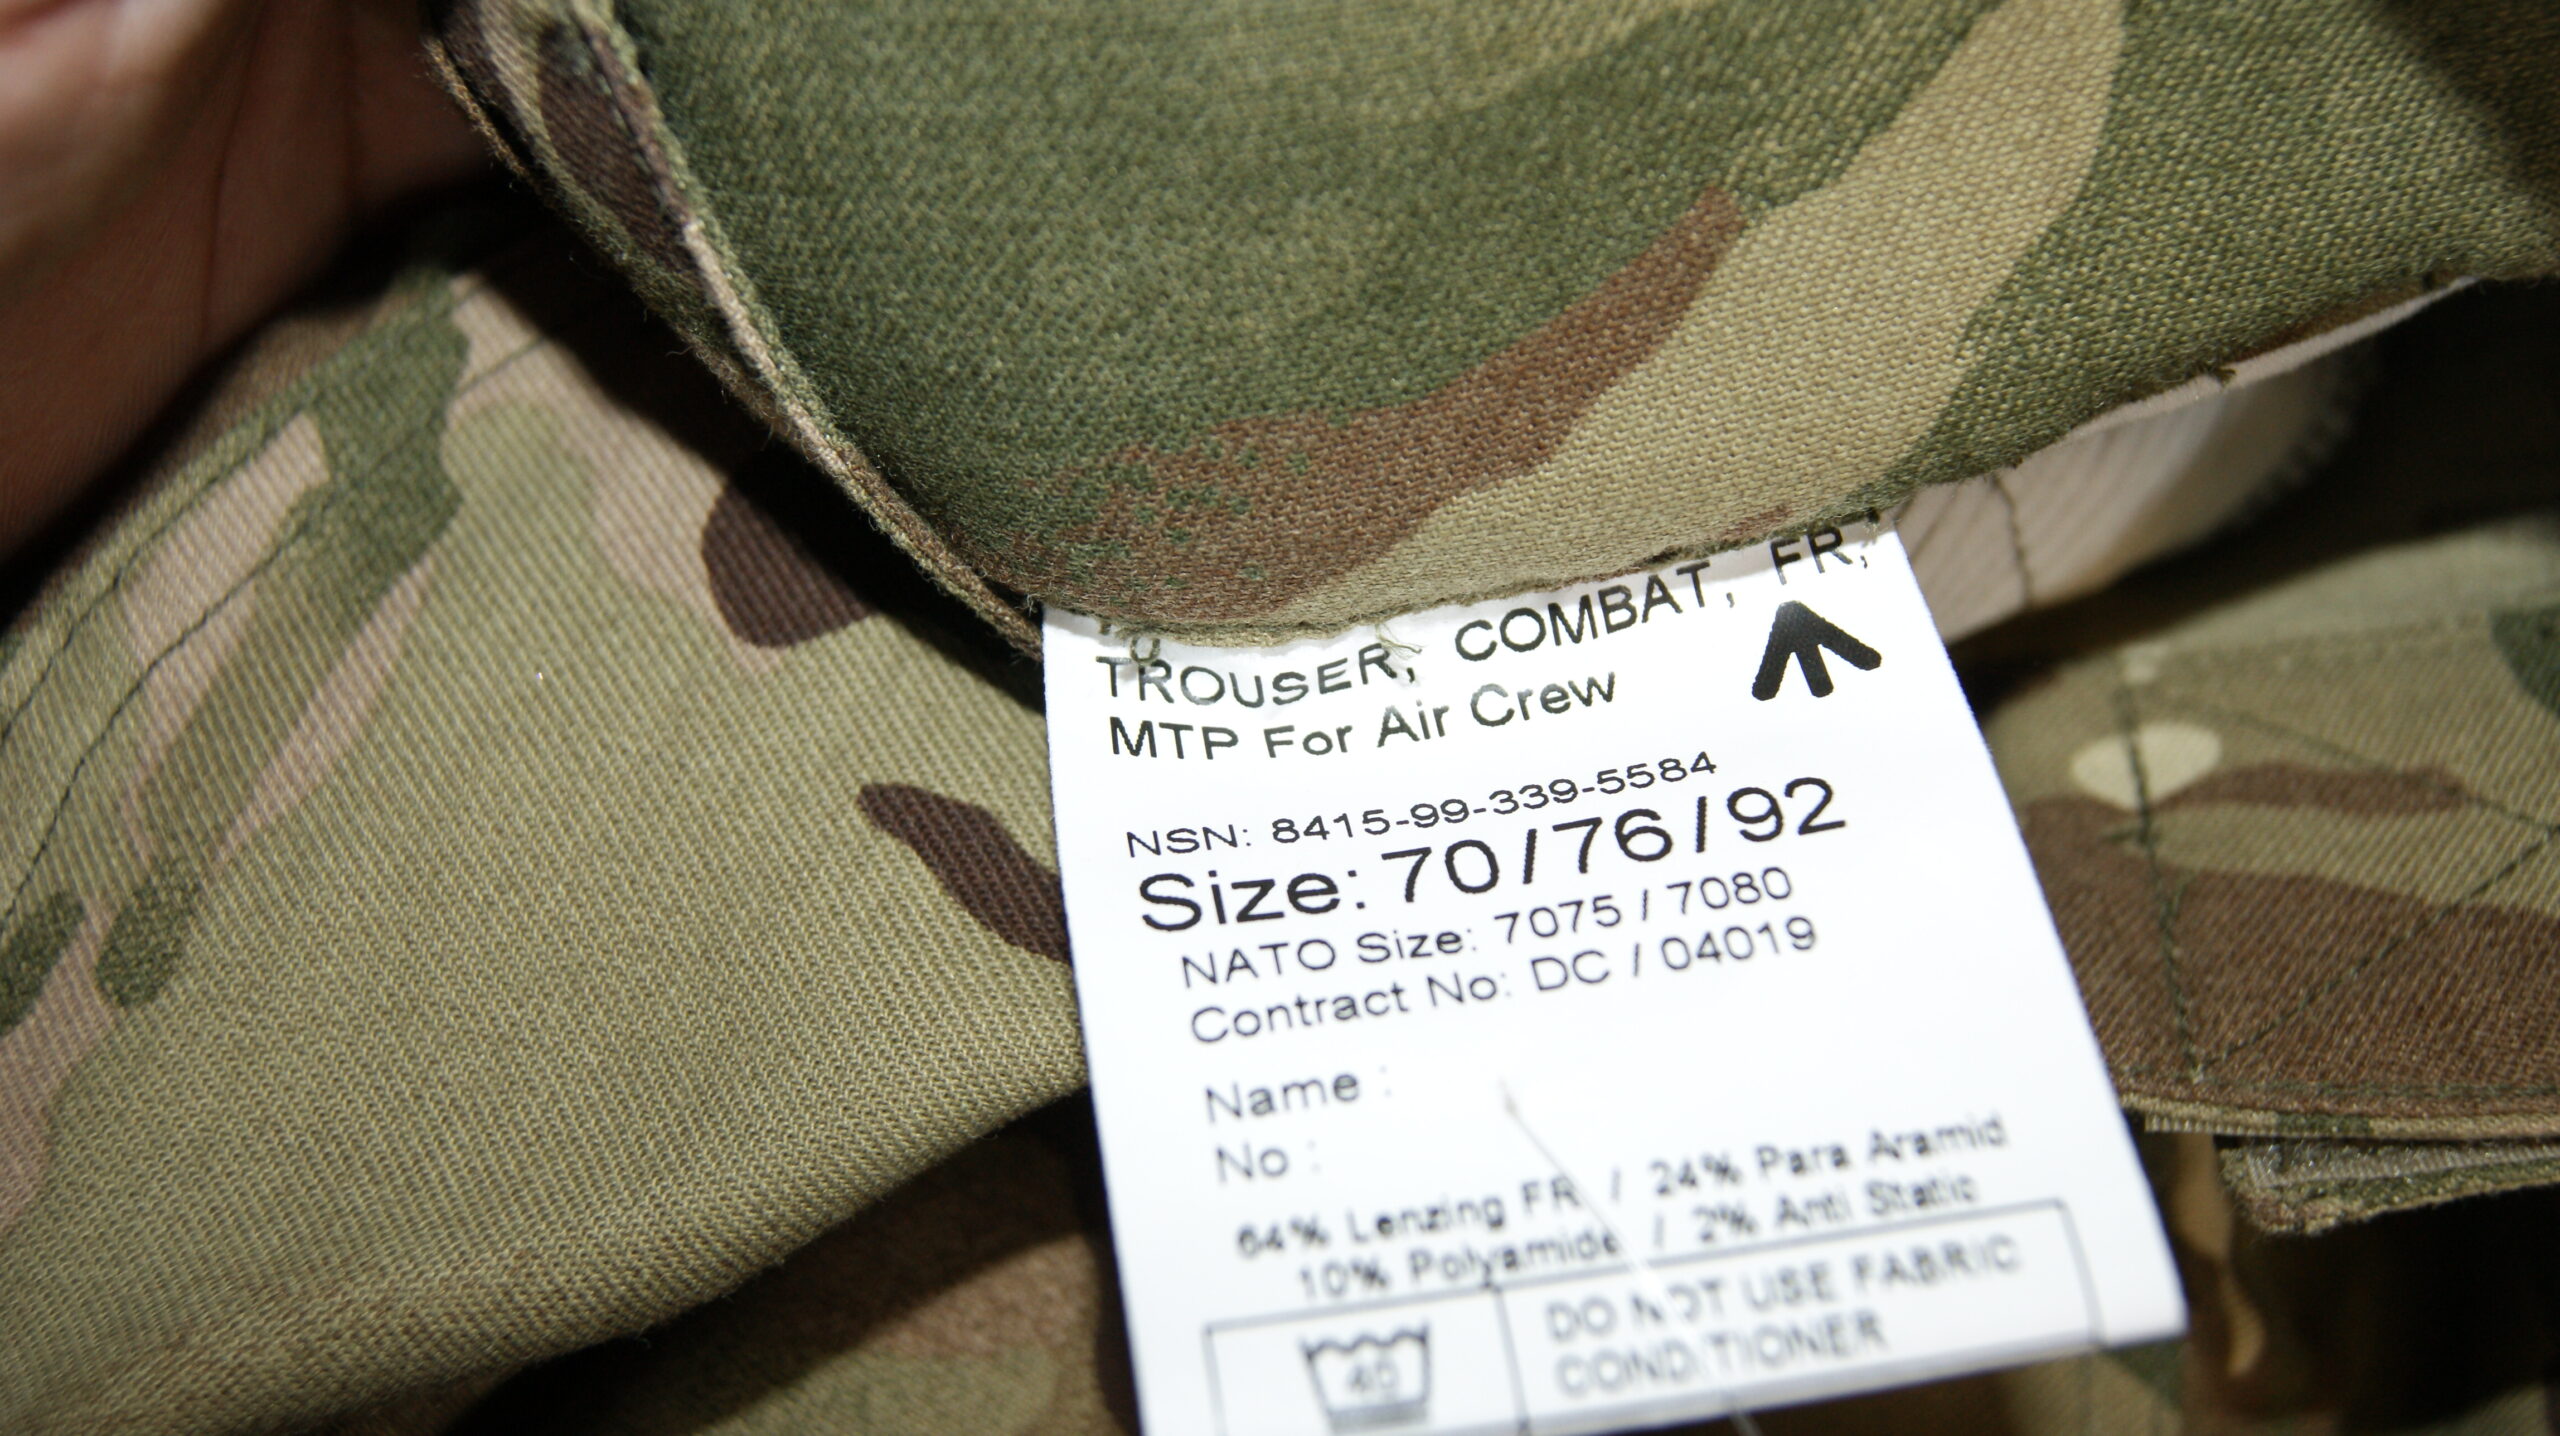 British Armt Mtp Trousers New Tactical Aircrew - Army Shop